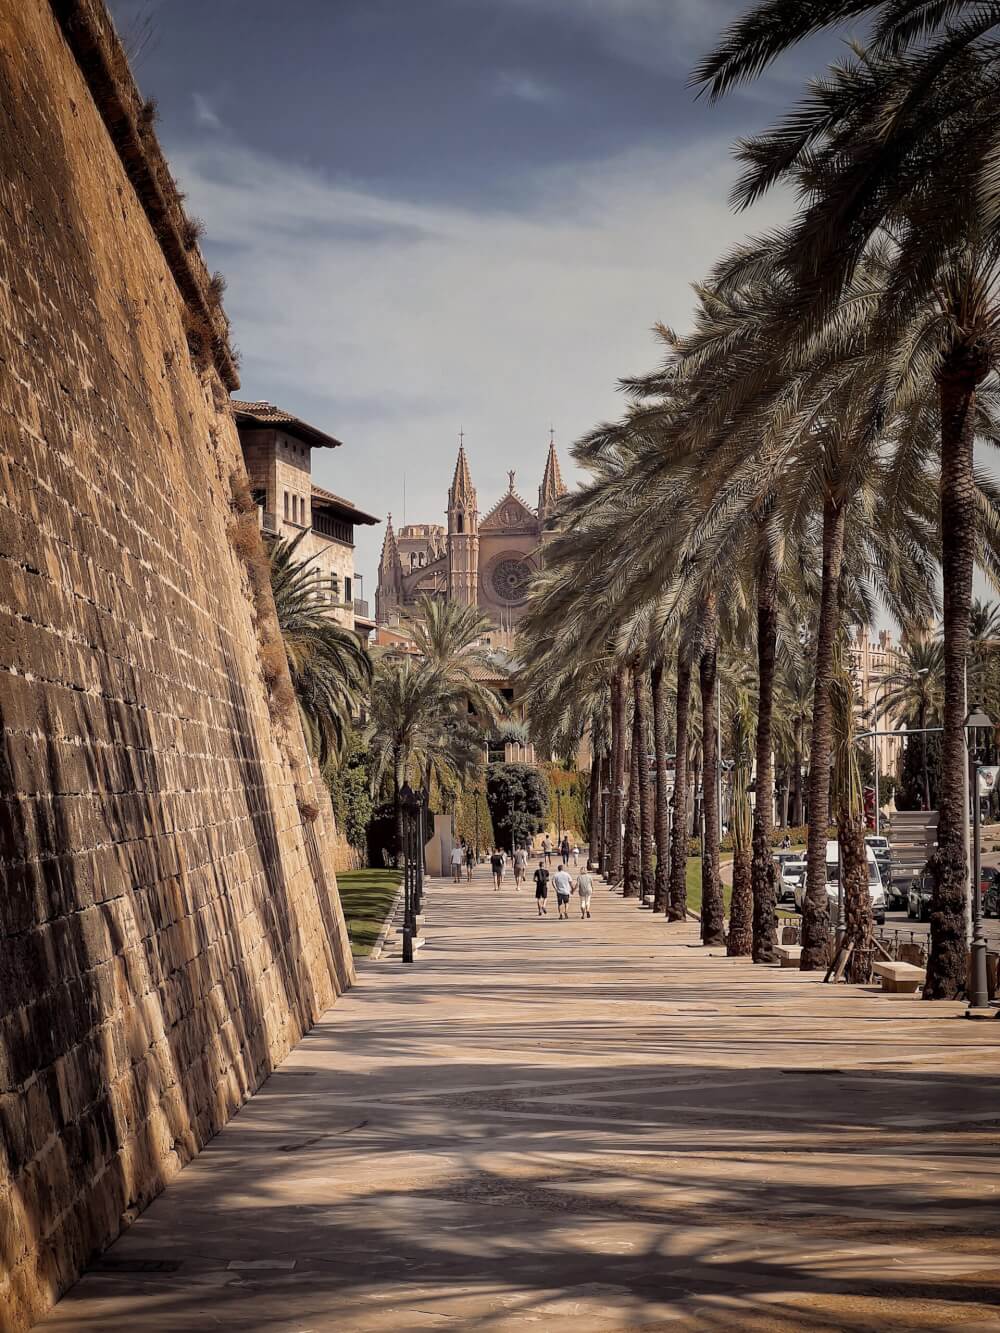 A palm-tree lined street that leads to a cathedral